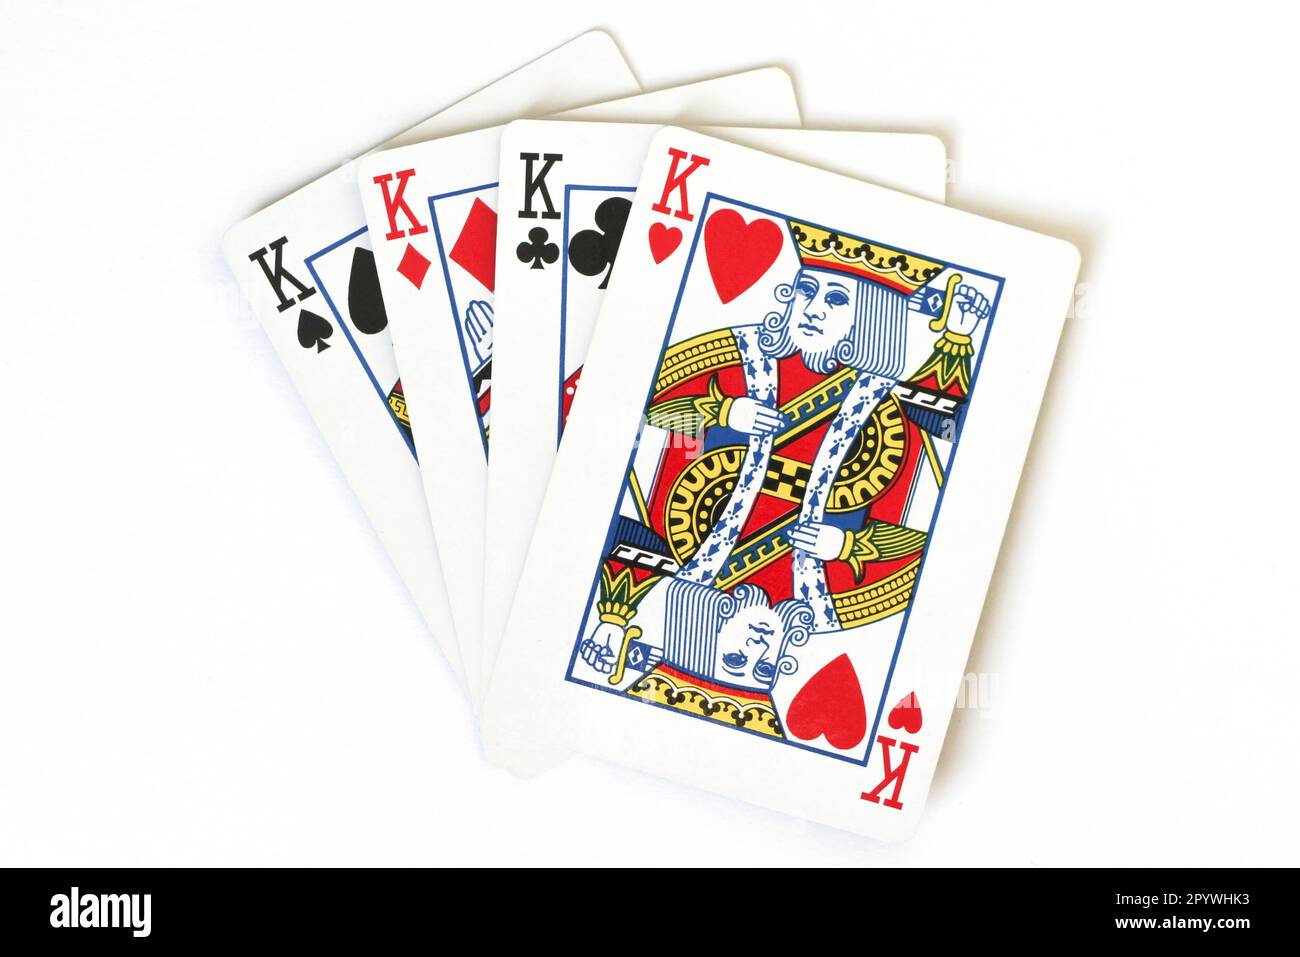 A close-up of four playing cards, forming a Four of a Kind poker hand Stock Photo